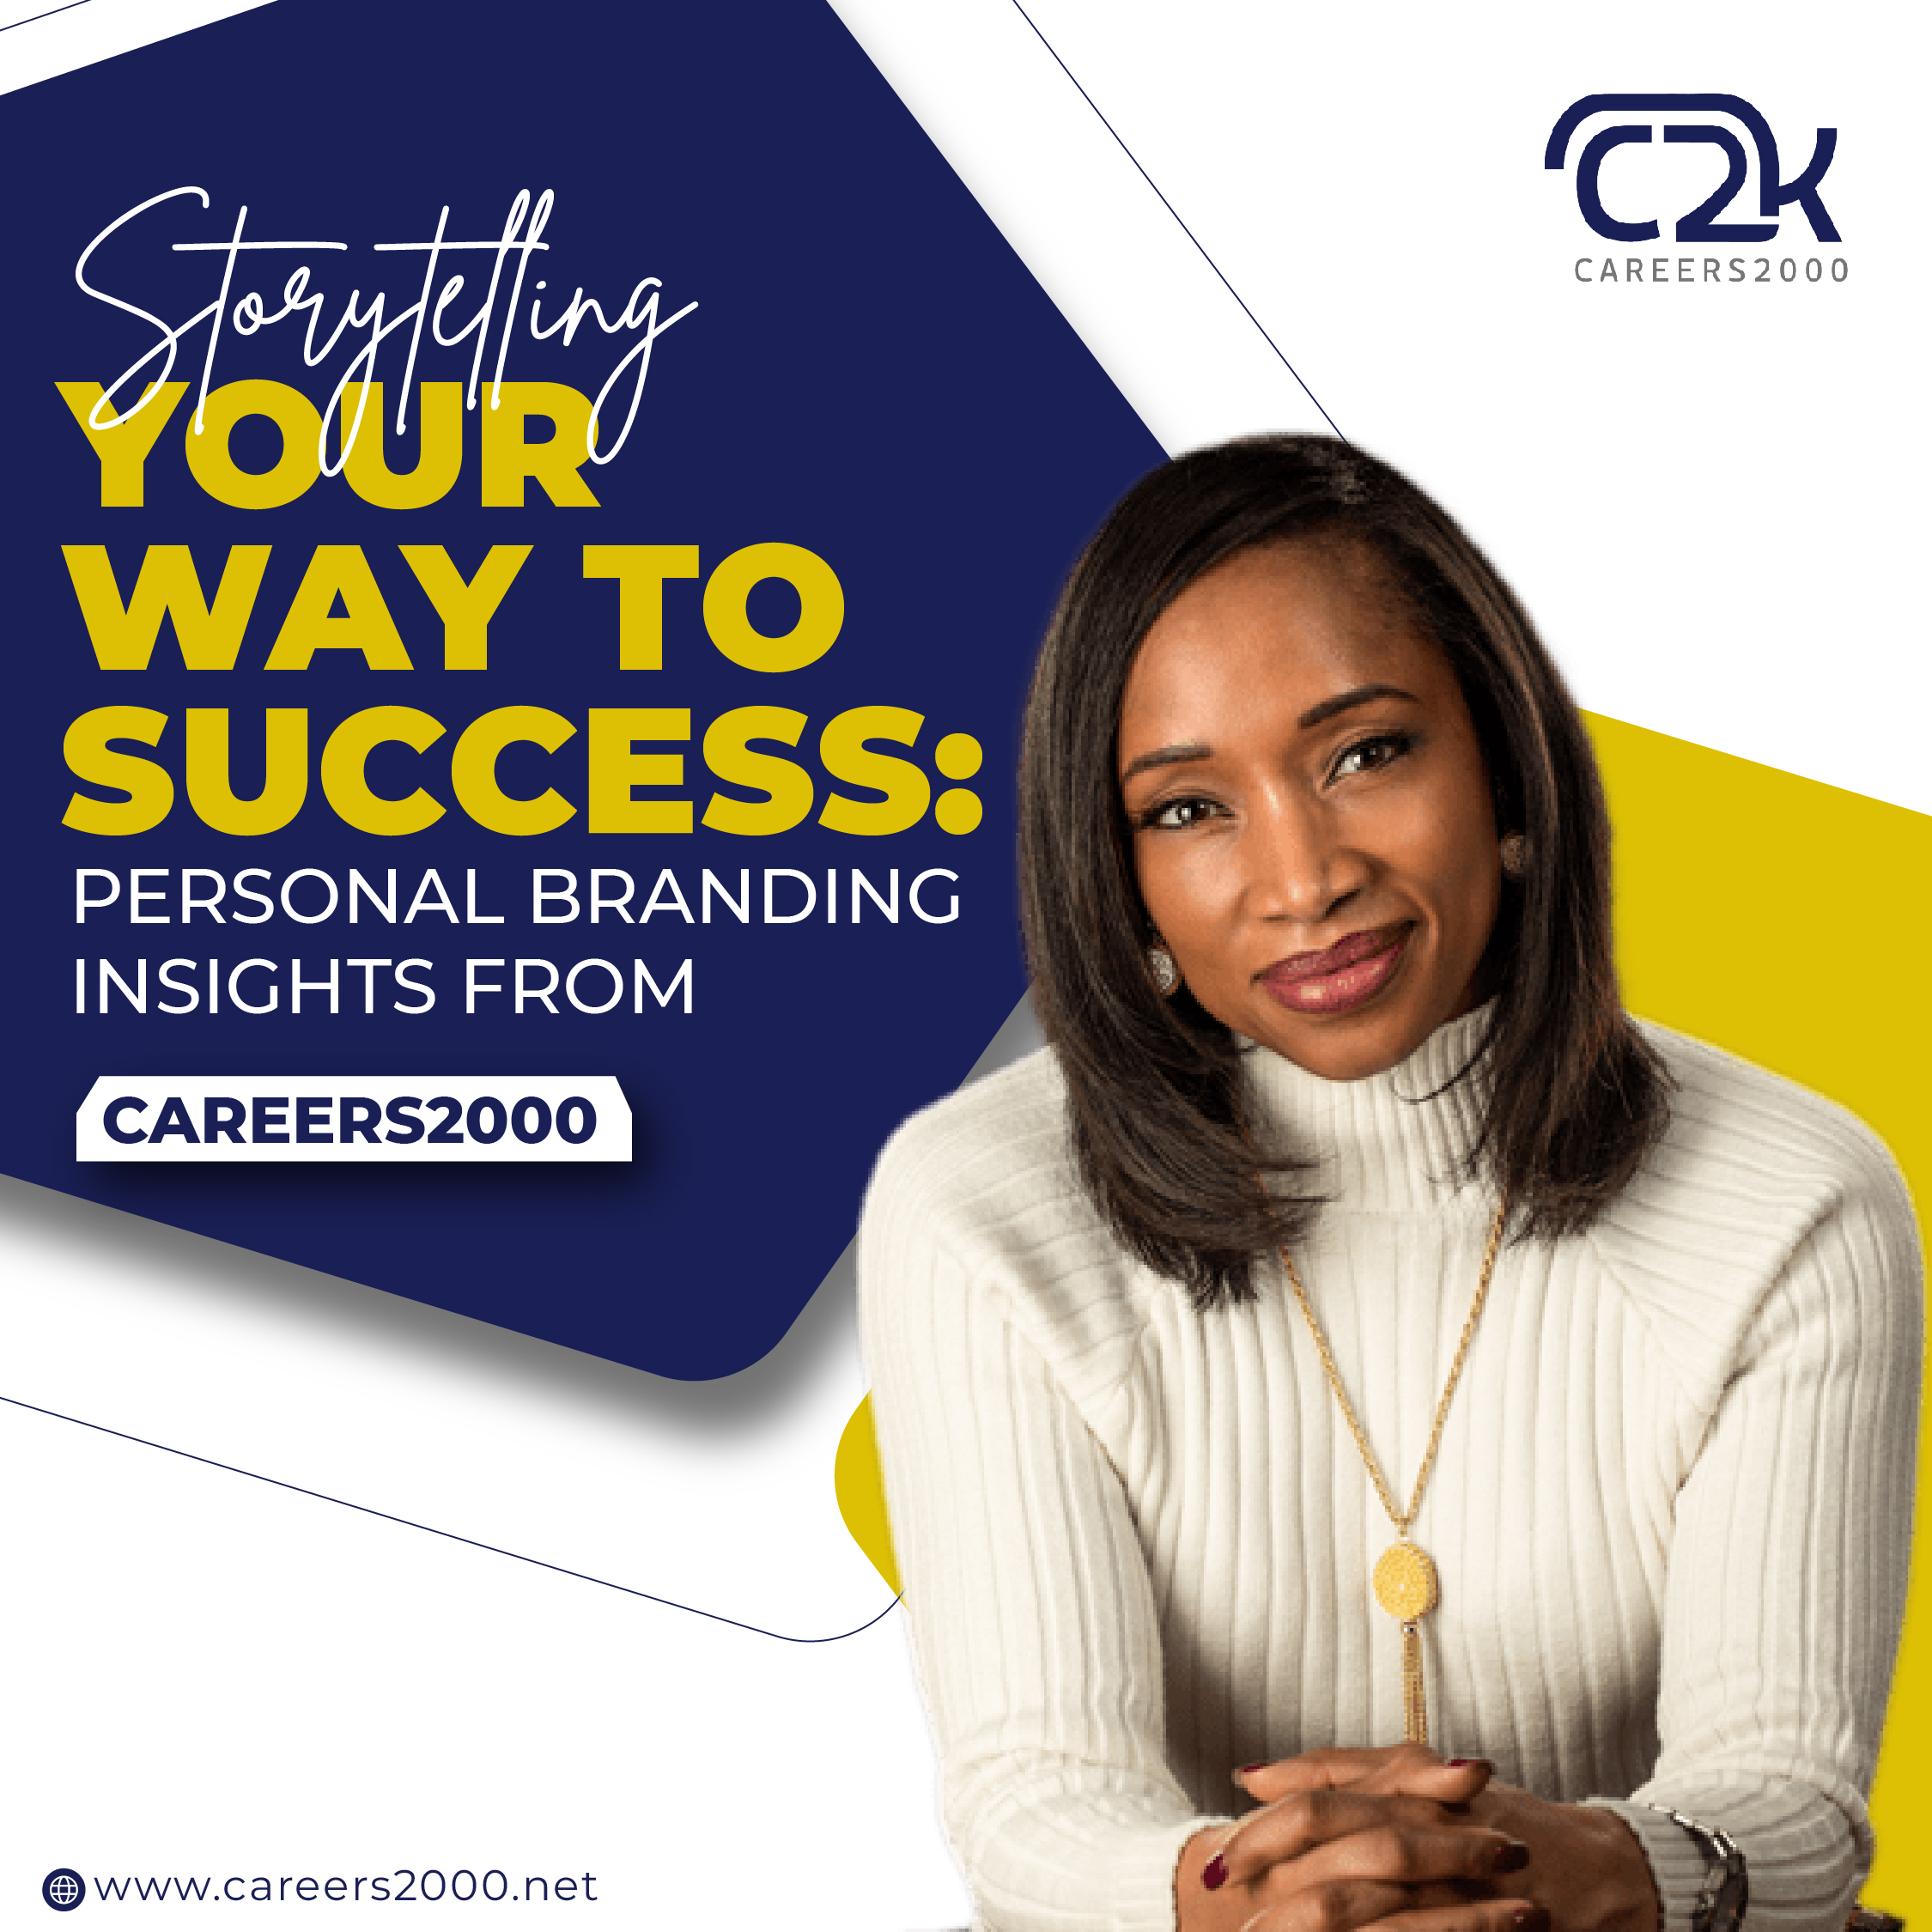 Exciting News in the World of Professional Growth! Storytelling Your Way to Success: Personal Branding Insights from Careers2000